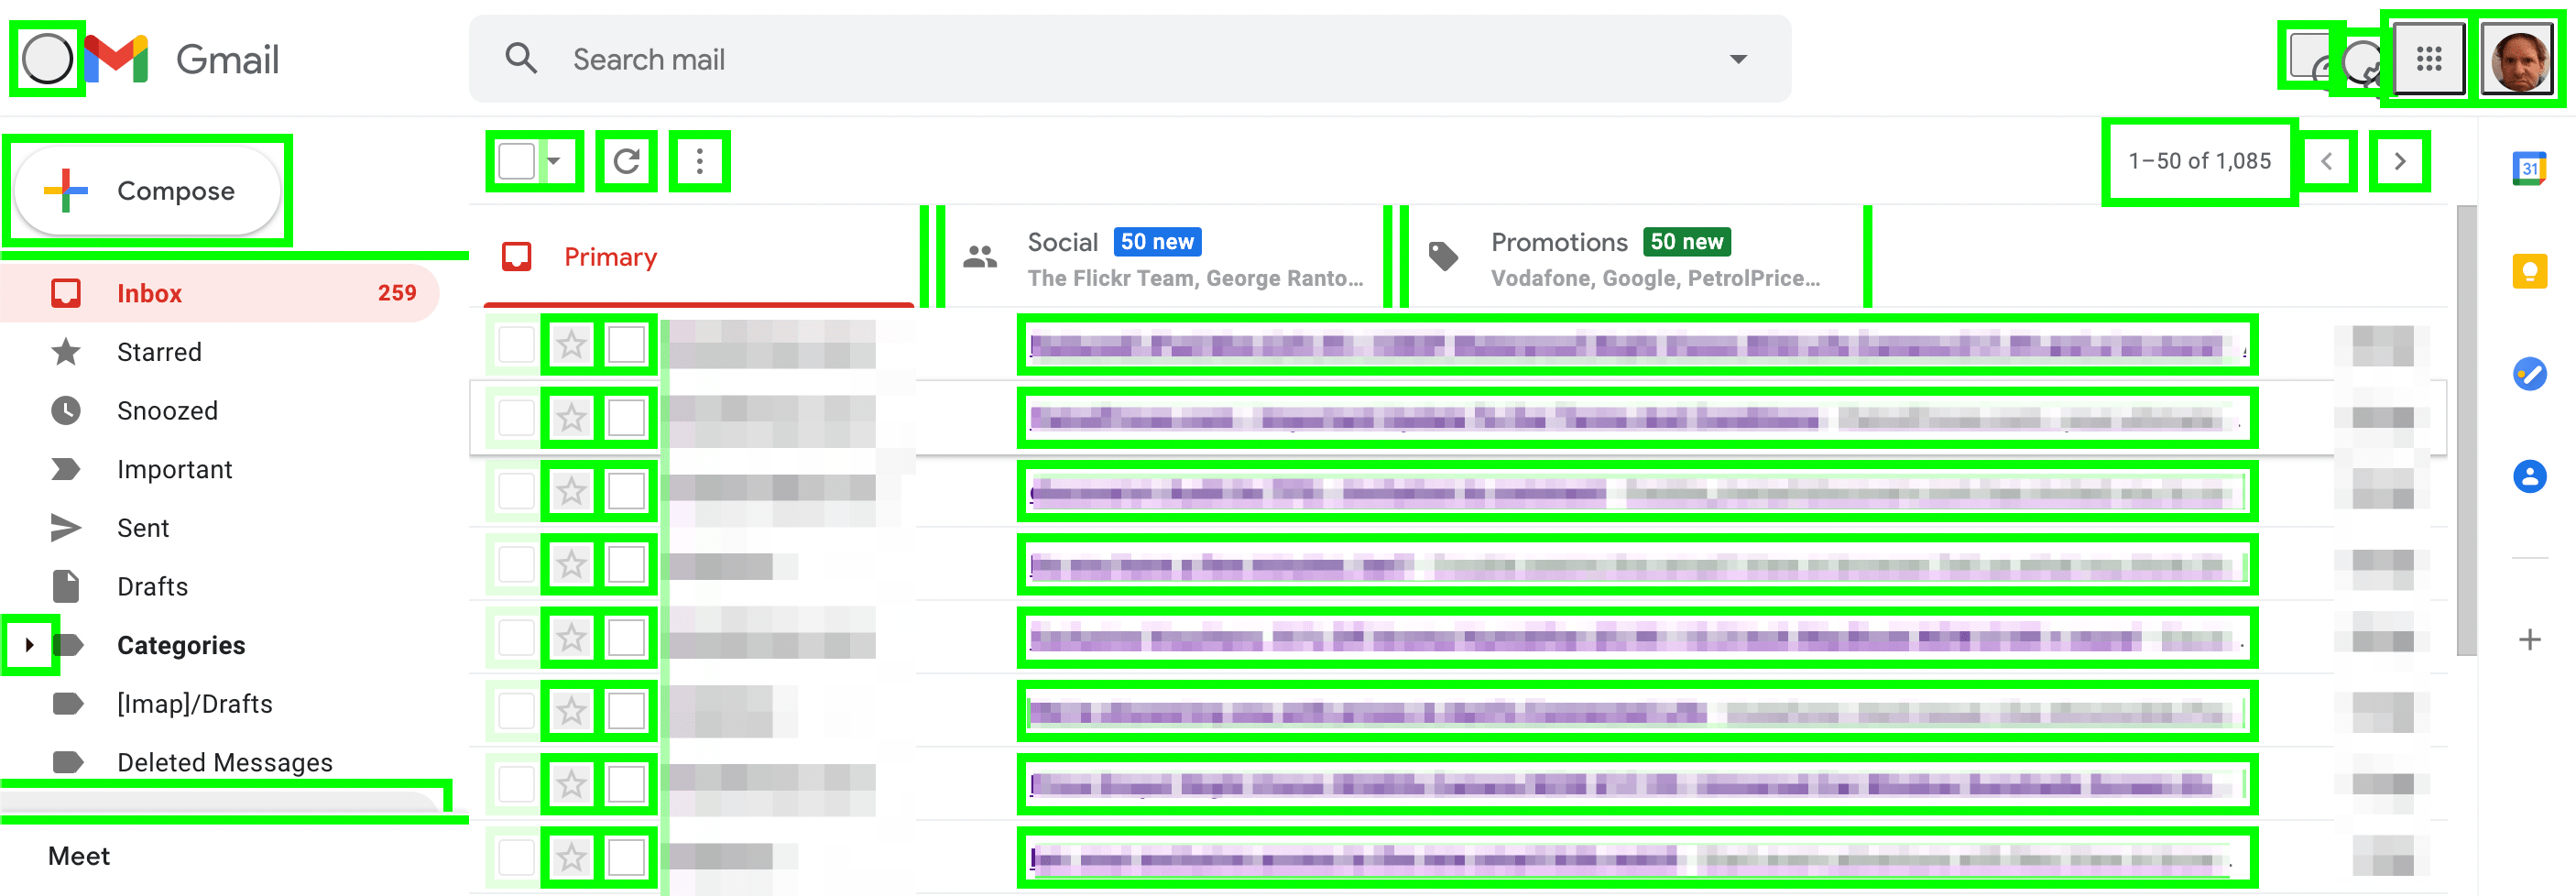 The Gmail user interface now awash with green outlines indicating all the HTML elements that have been swapped for more semantic native HTML equivalents